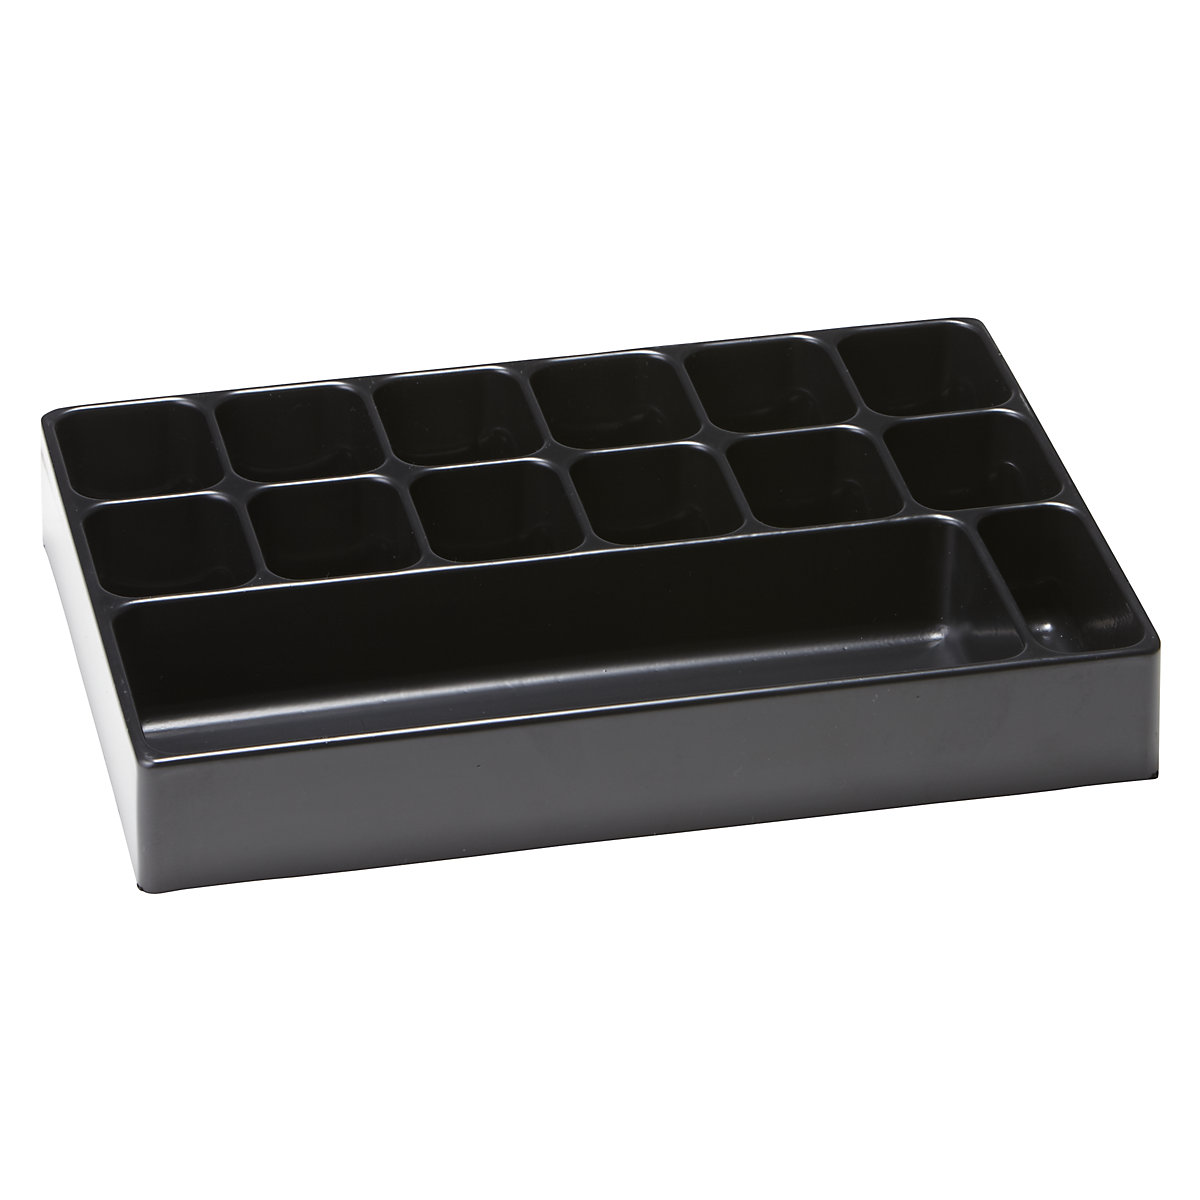 Inserts, pack of 10, polystyrene, black, division into 14 compartments-4